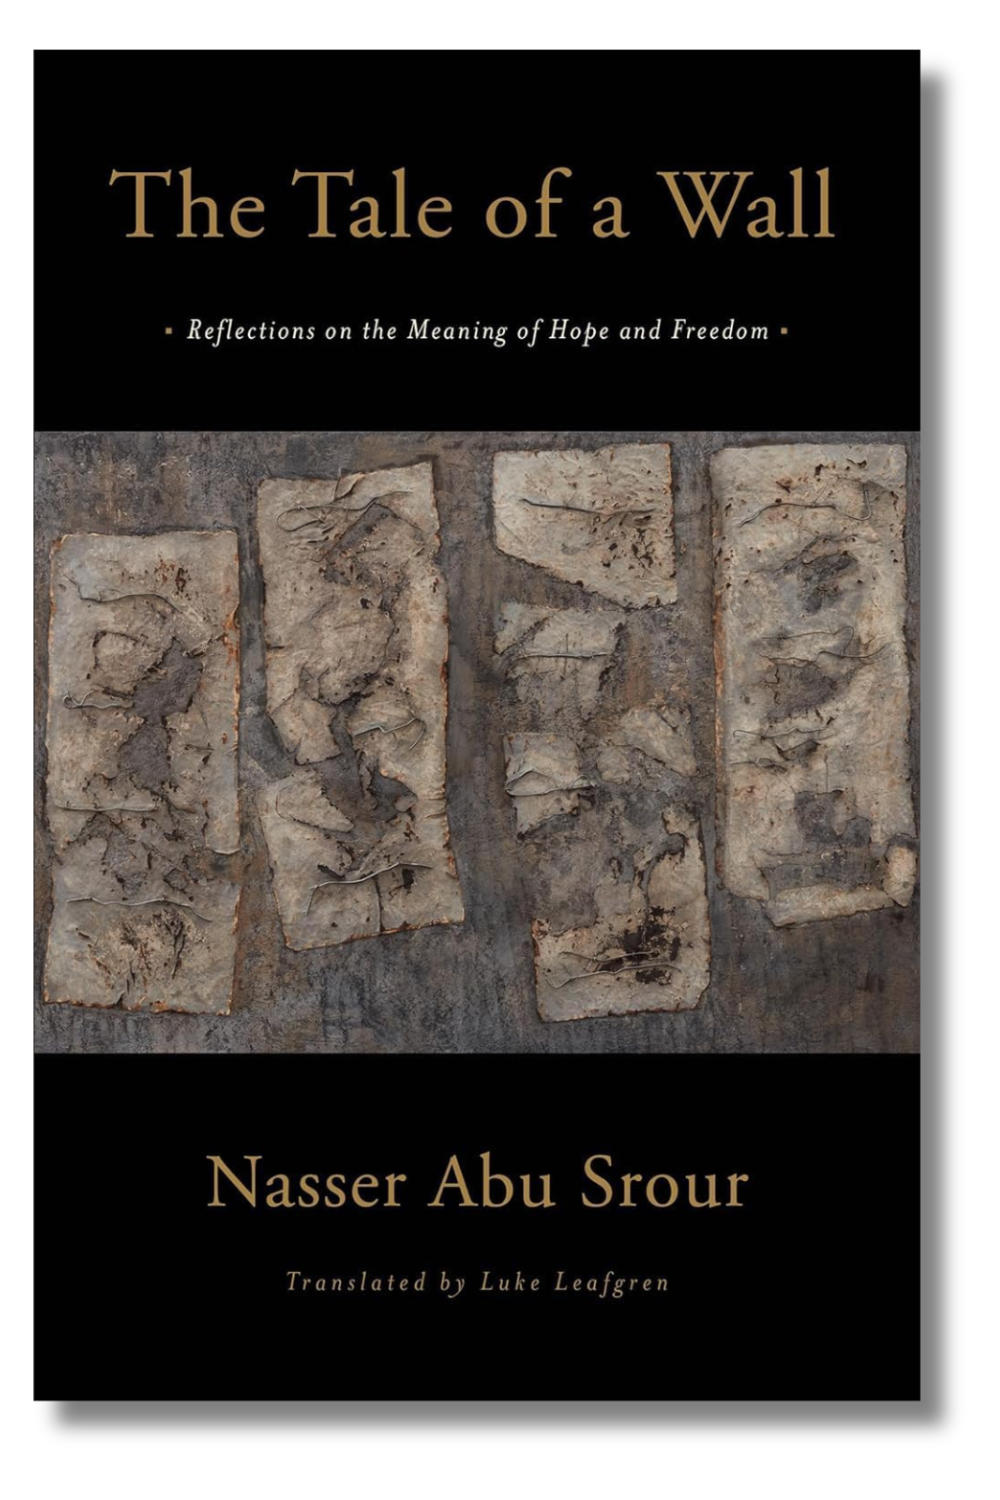 The cover of "The Tale of a Wall" by Nasser Abu Srour, tr. by Luke Leafgren